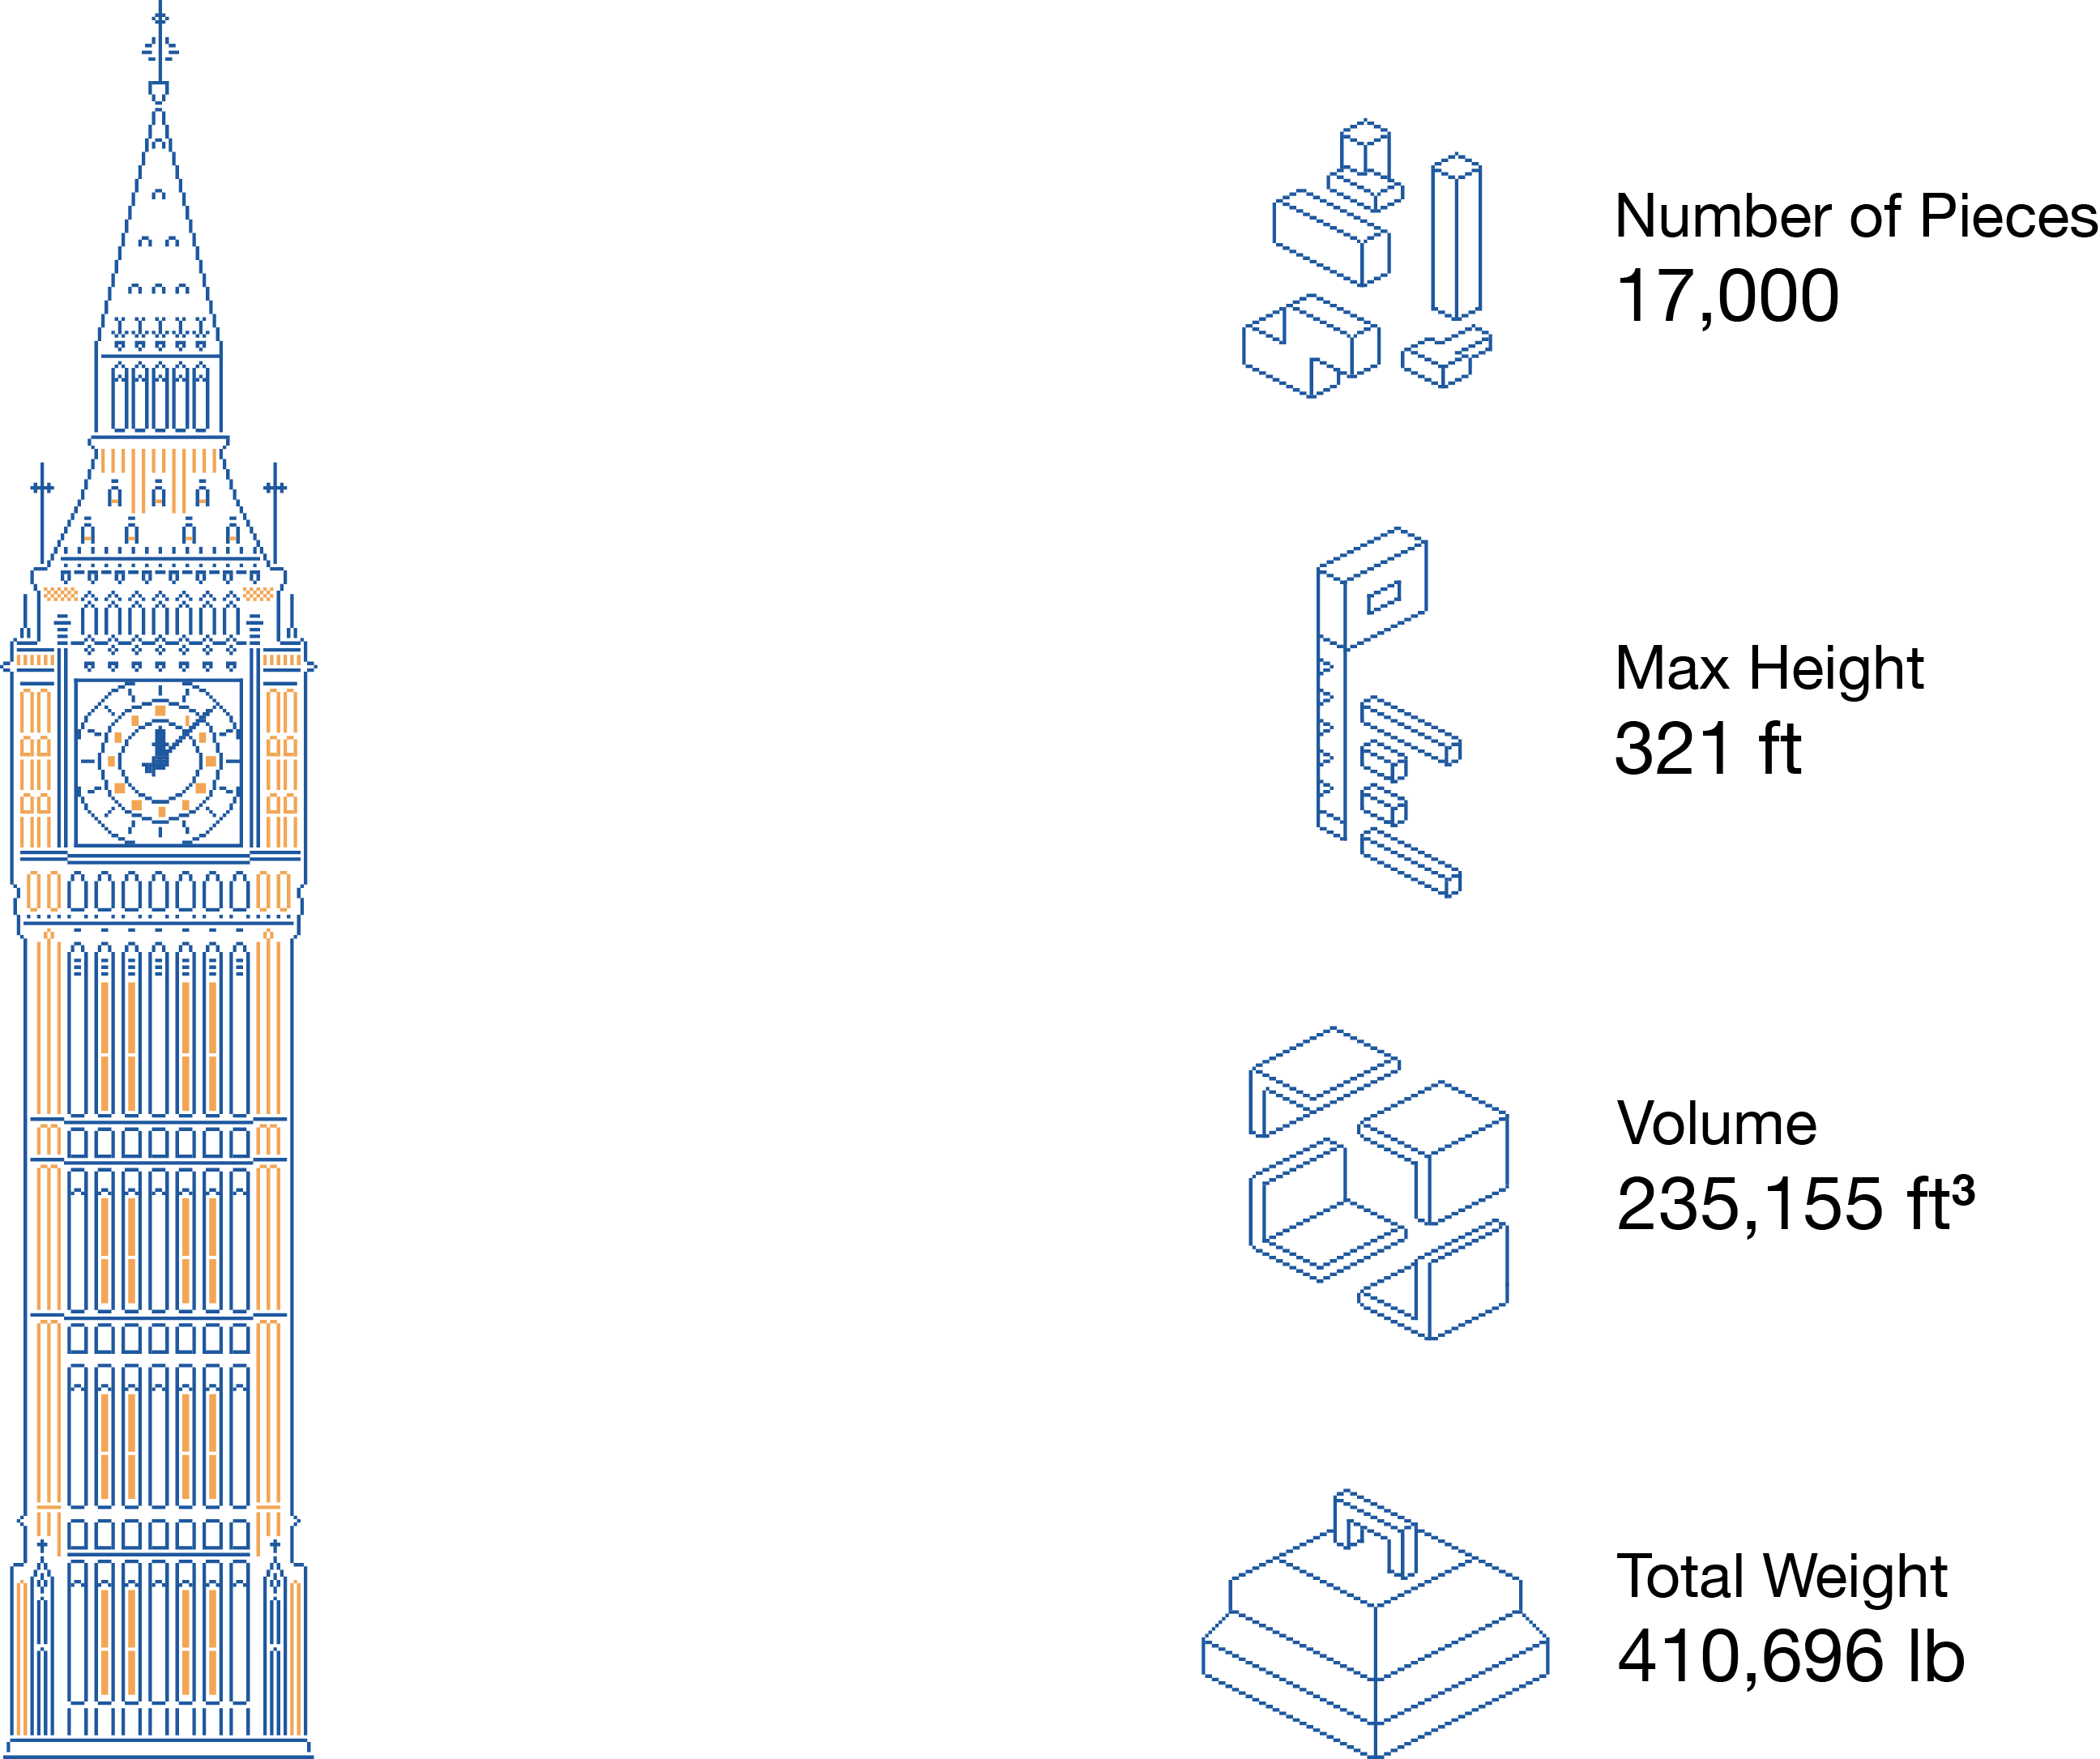 Estimated scaffolding requirement for the Big Ben, London.